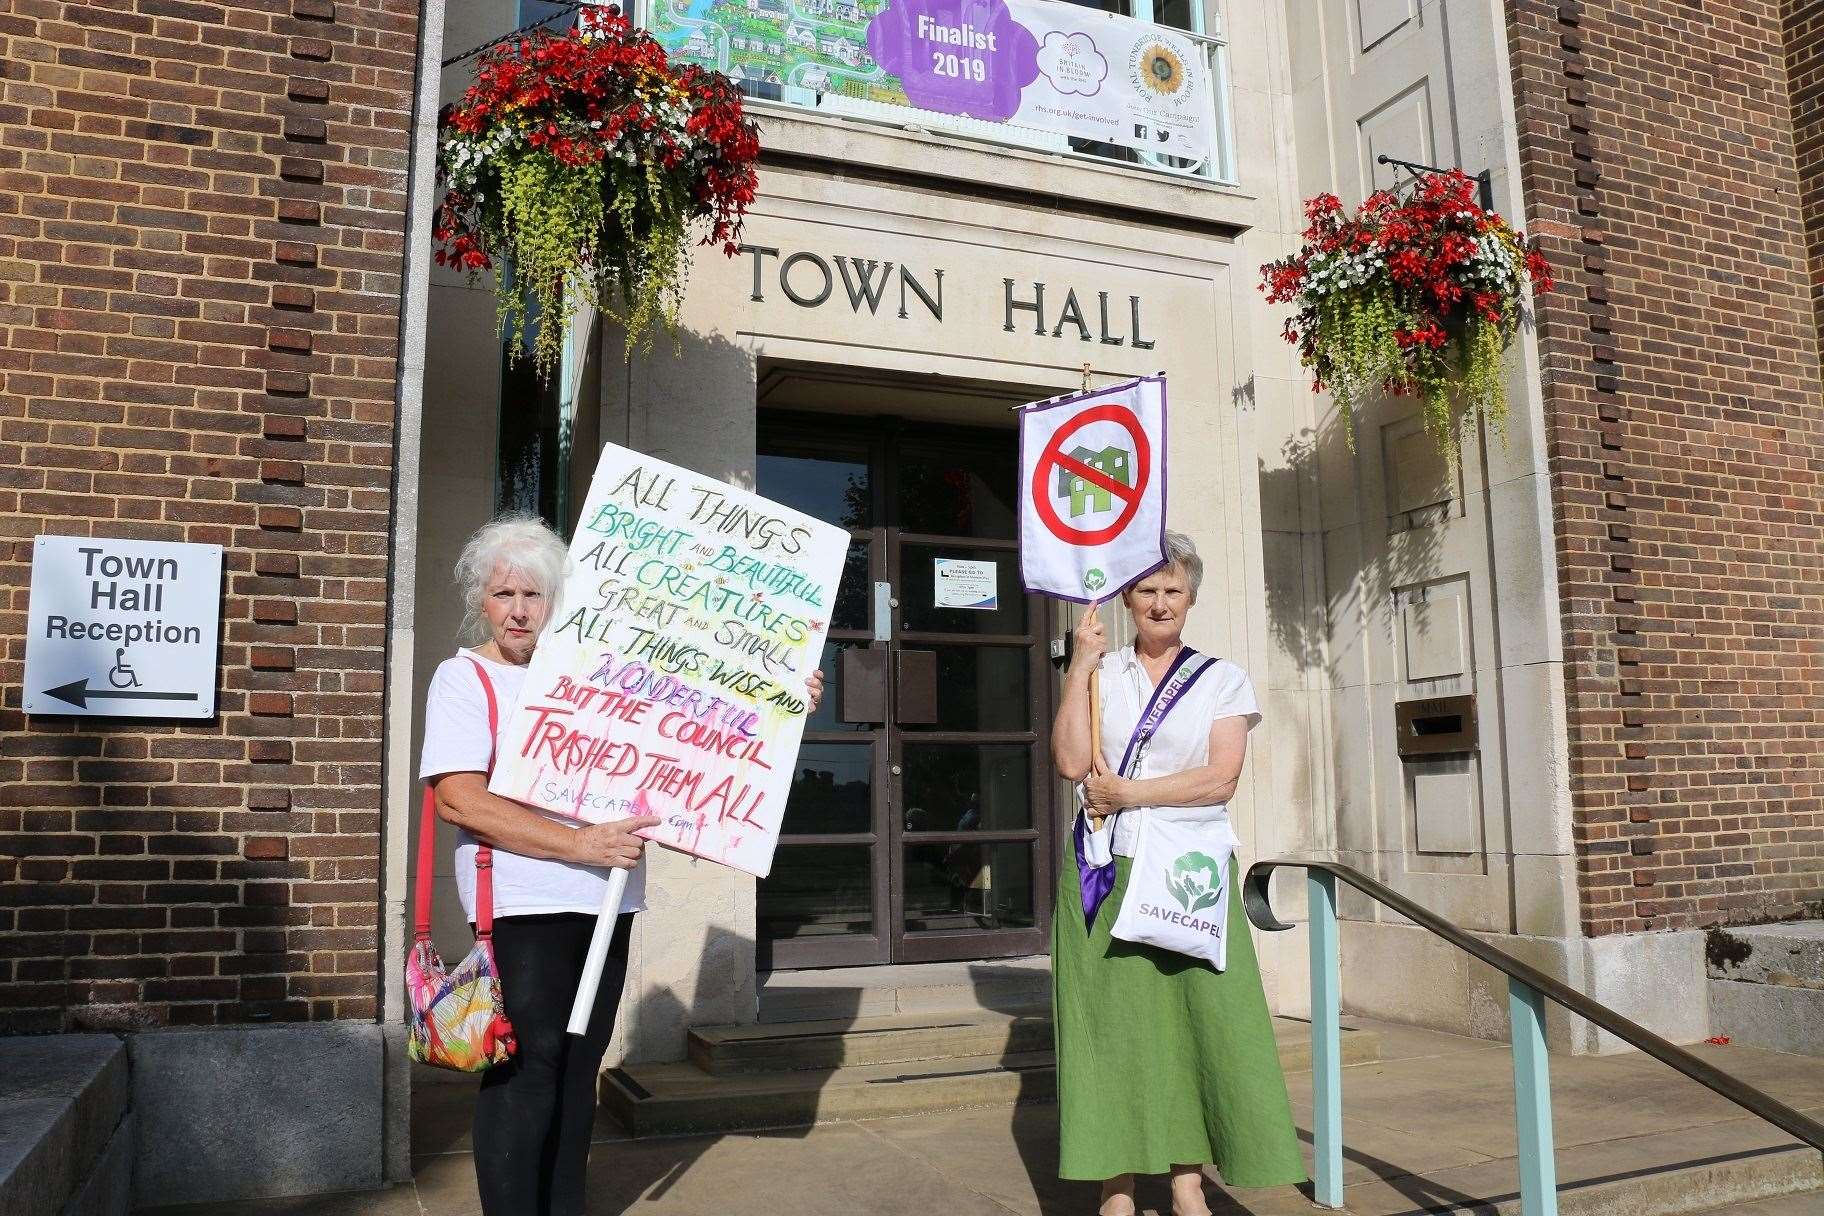 Save Capel demonstrators picketed the Town Hall in August